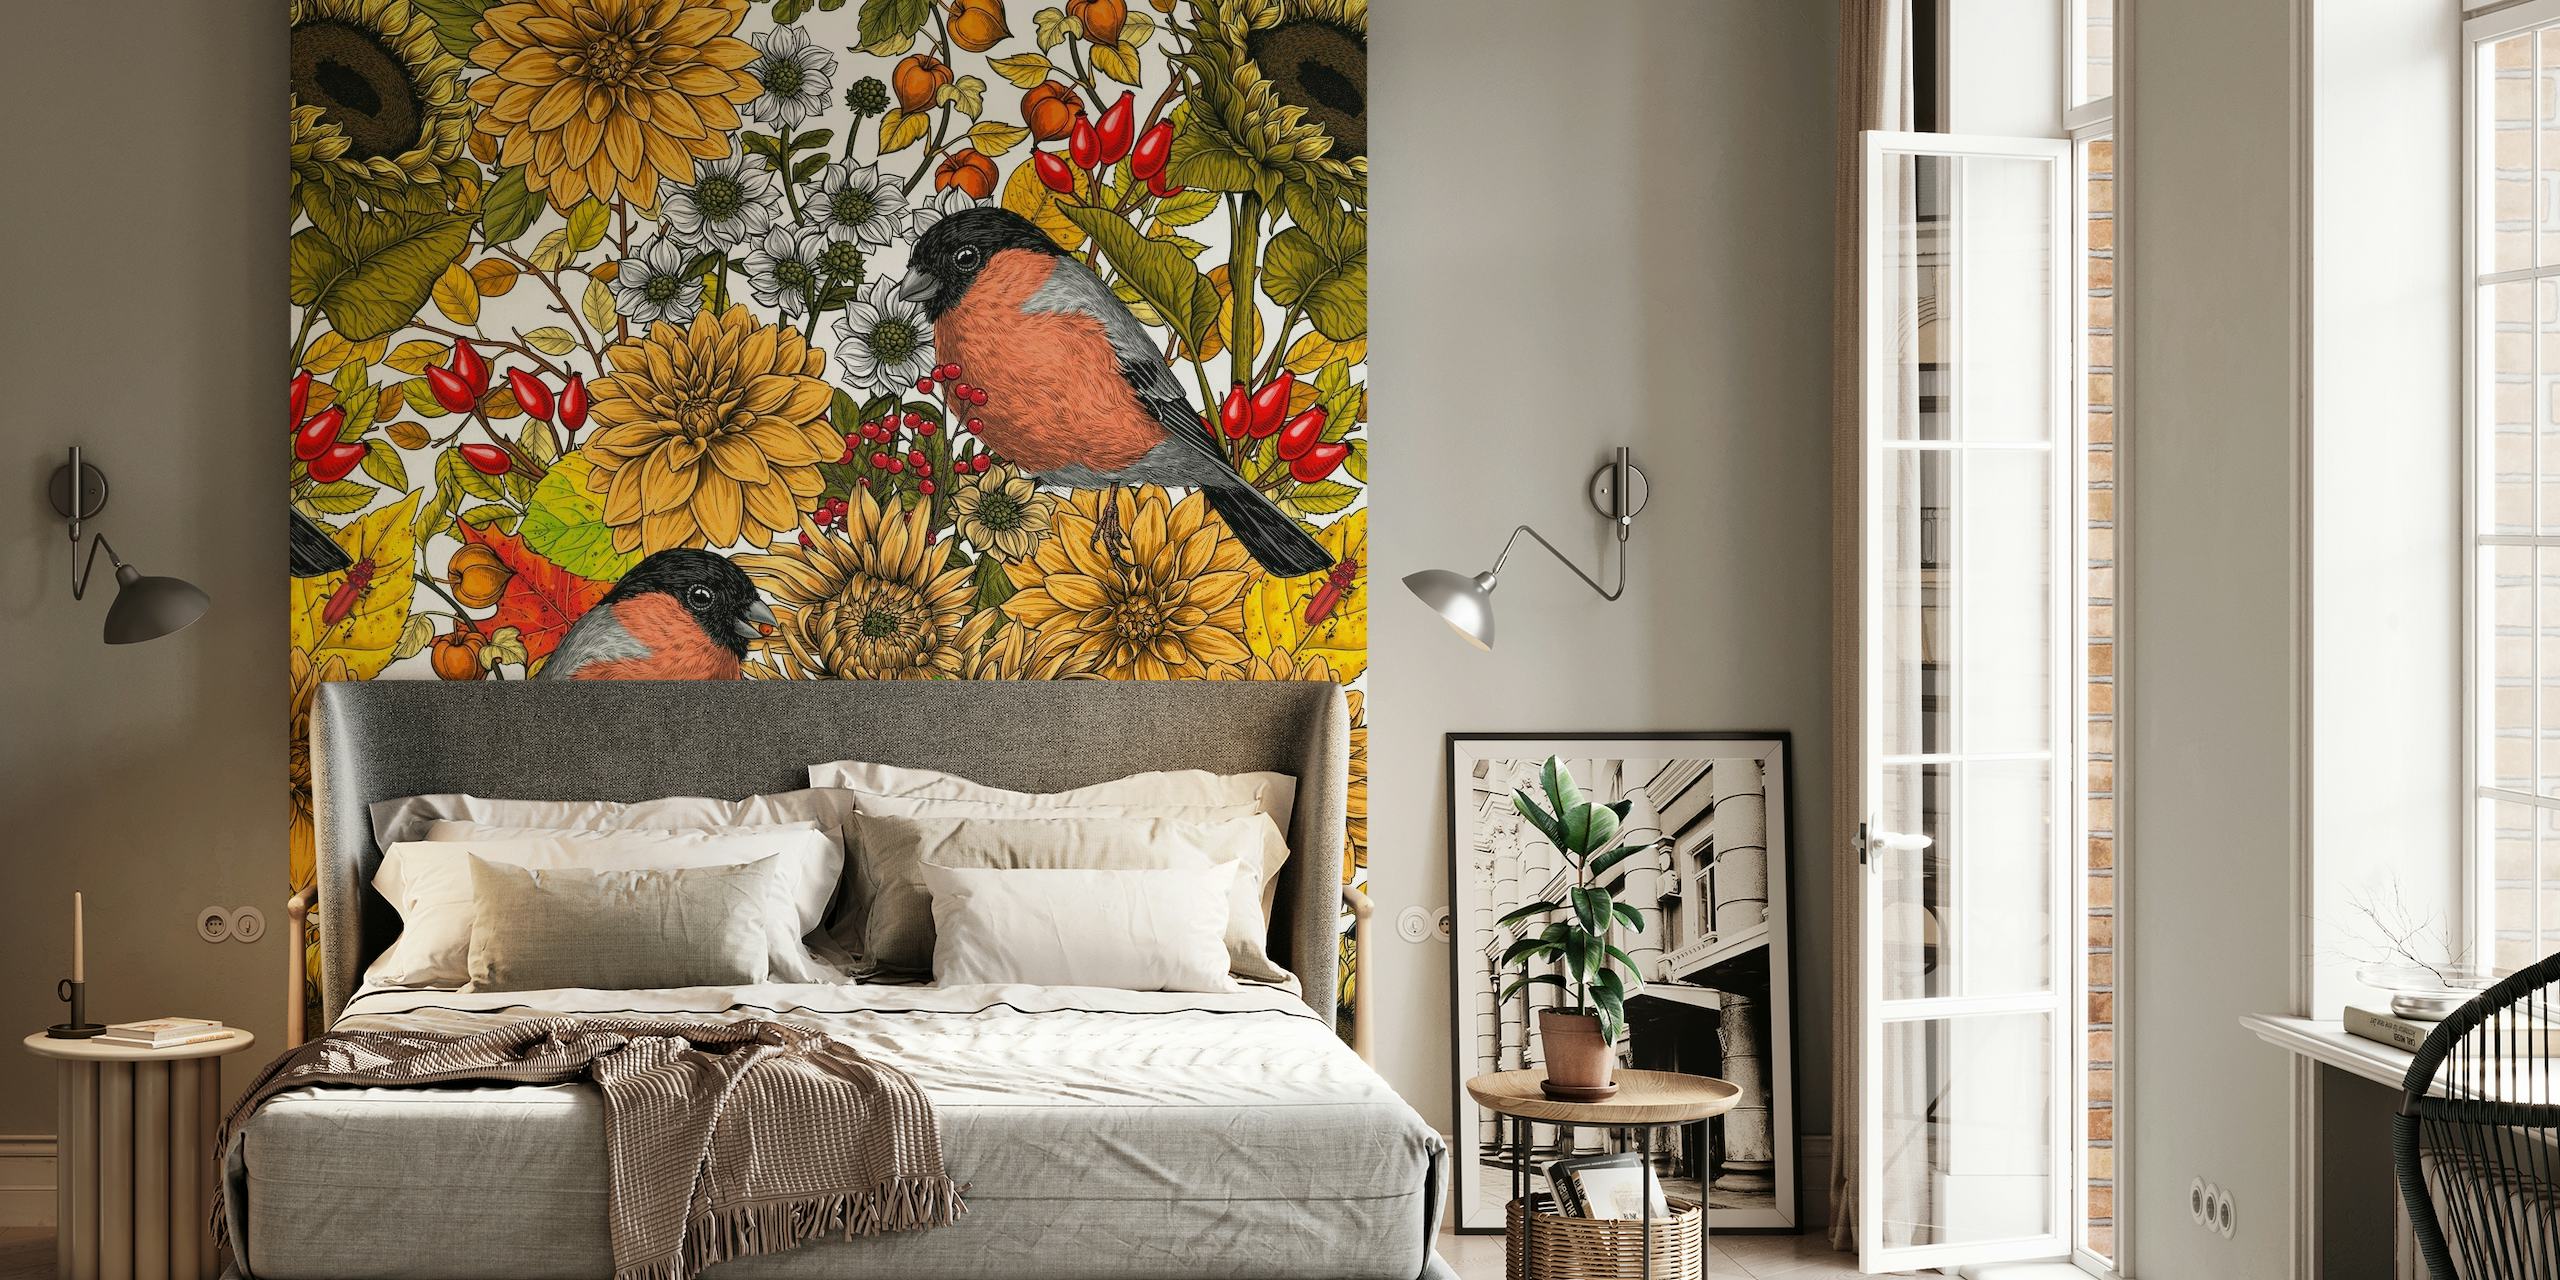 Wall mural with sunflowers, marigolds, and birds representing autumn garden scenery